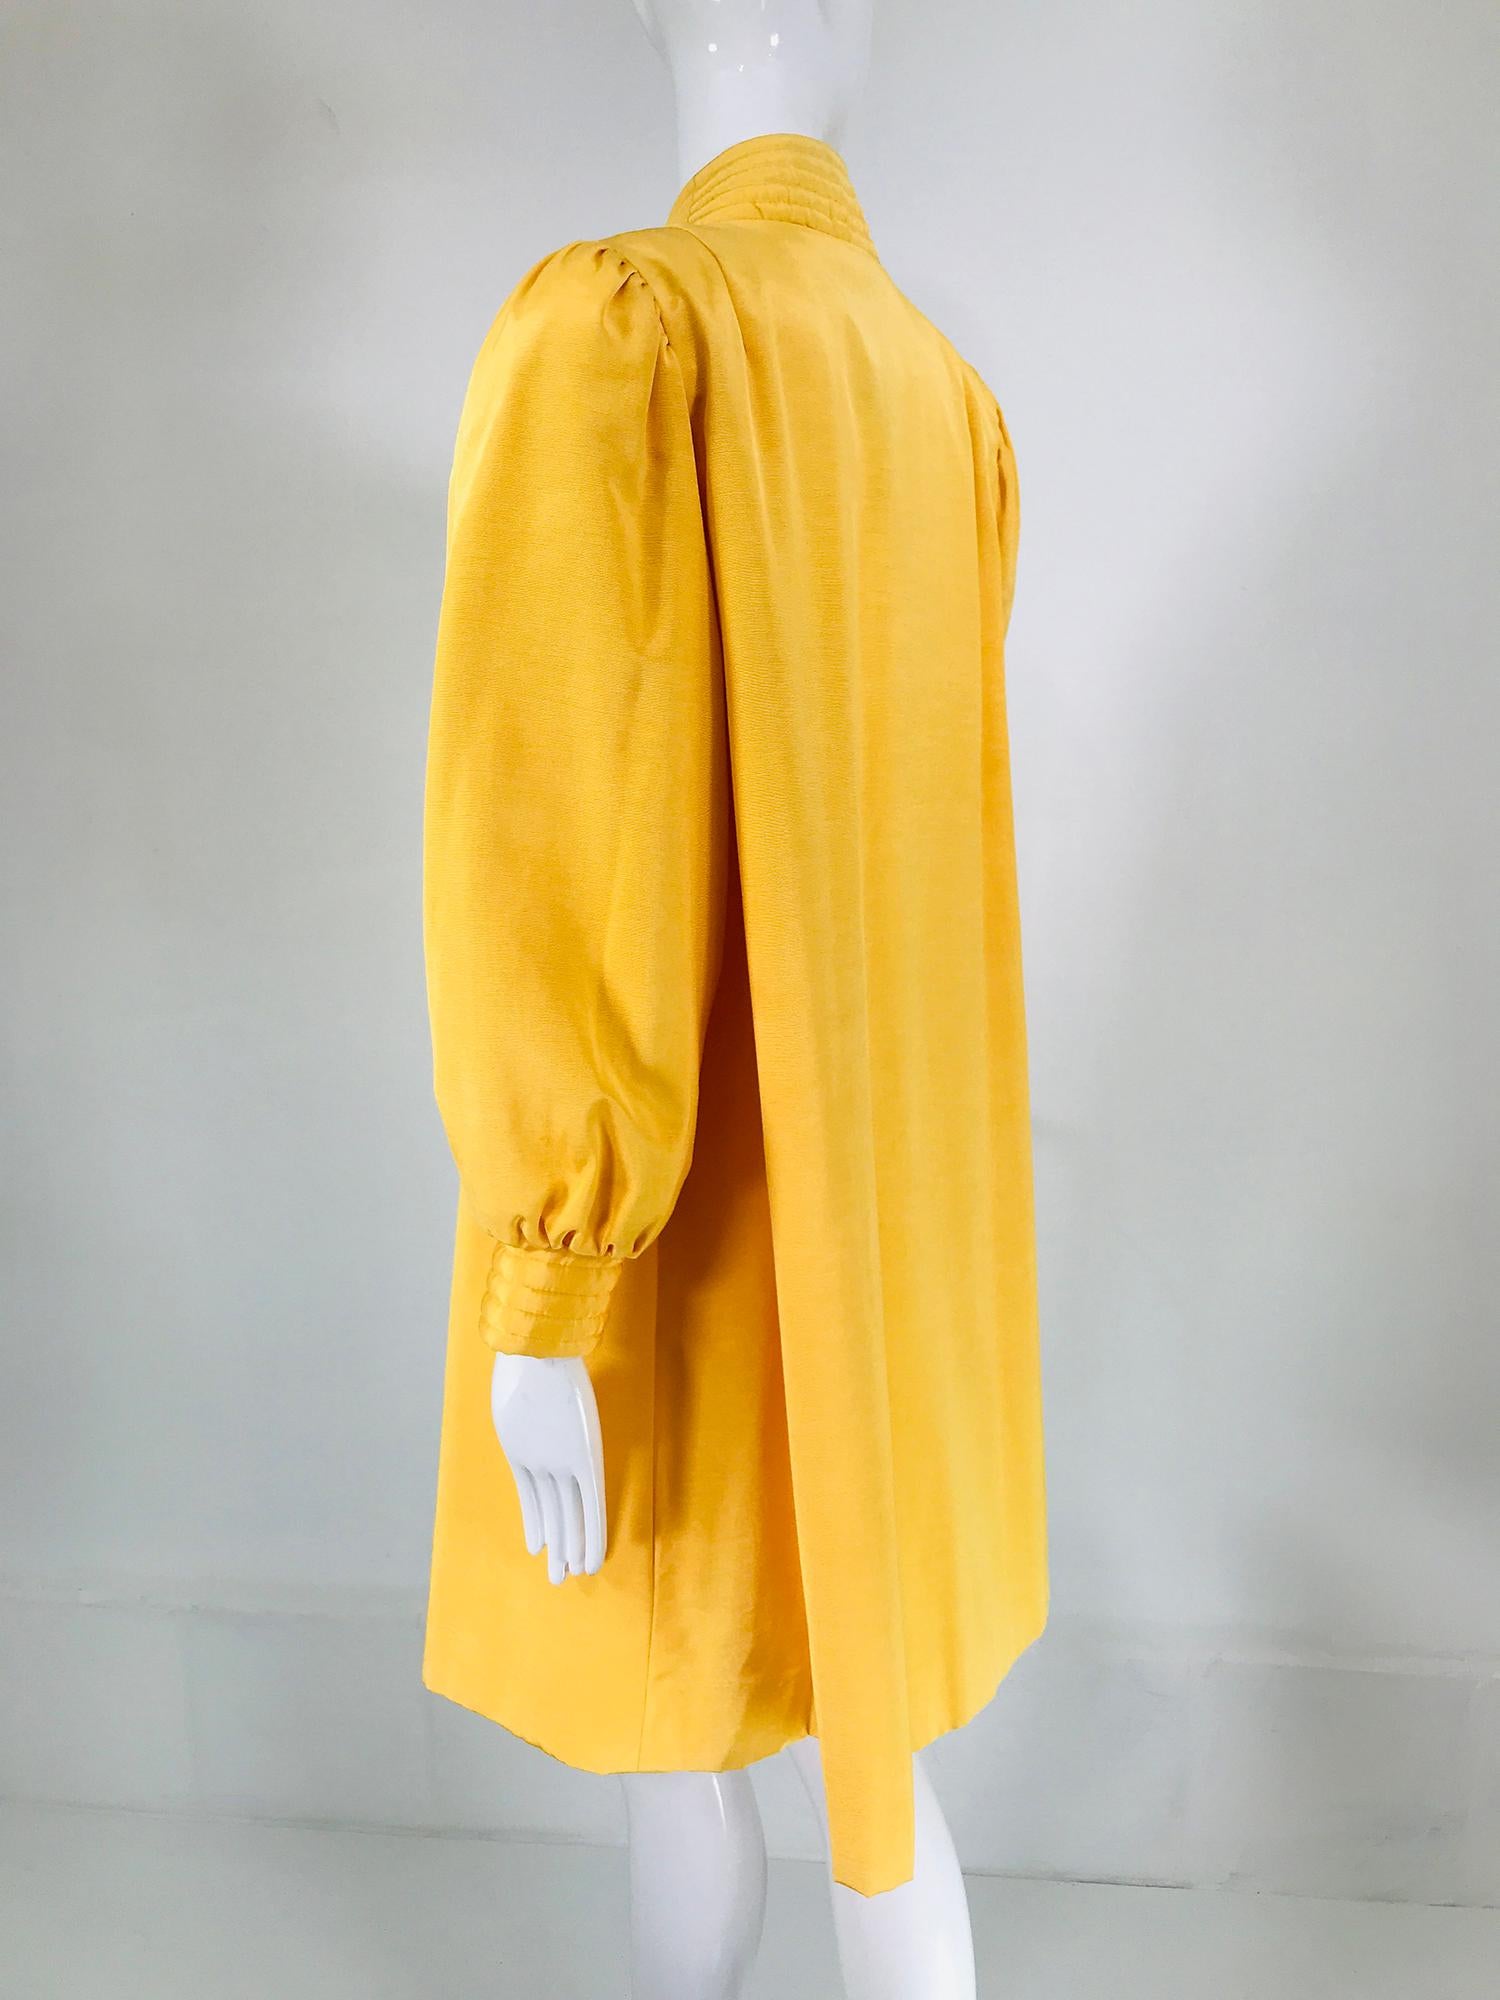 Victor Costa Mustard Yellow Faille Coat Quilted Facings & Cuffs 1980s For Sale 1